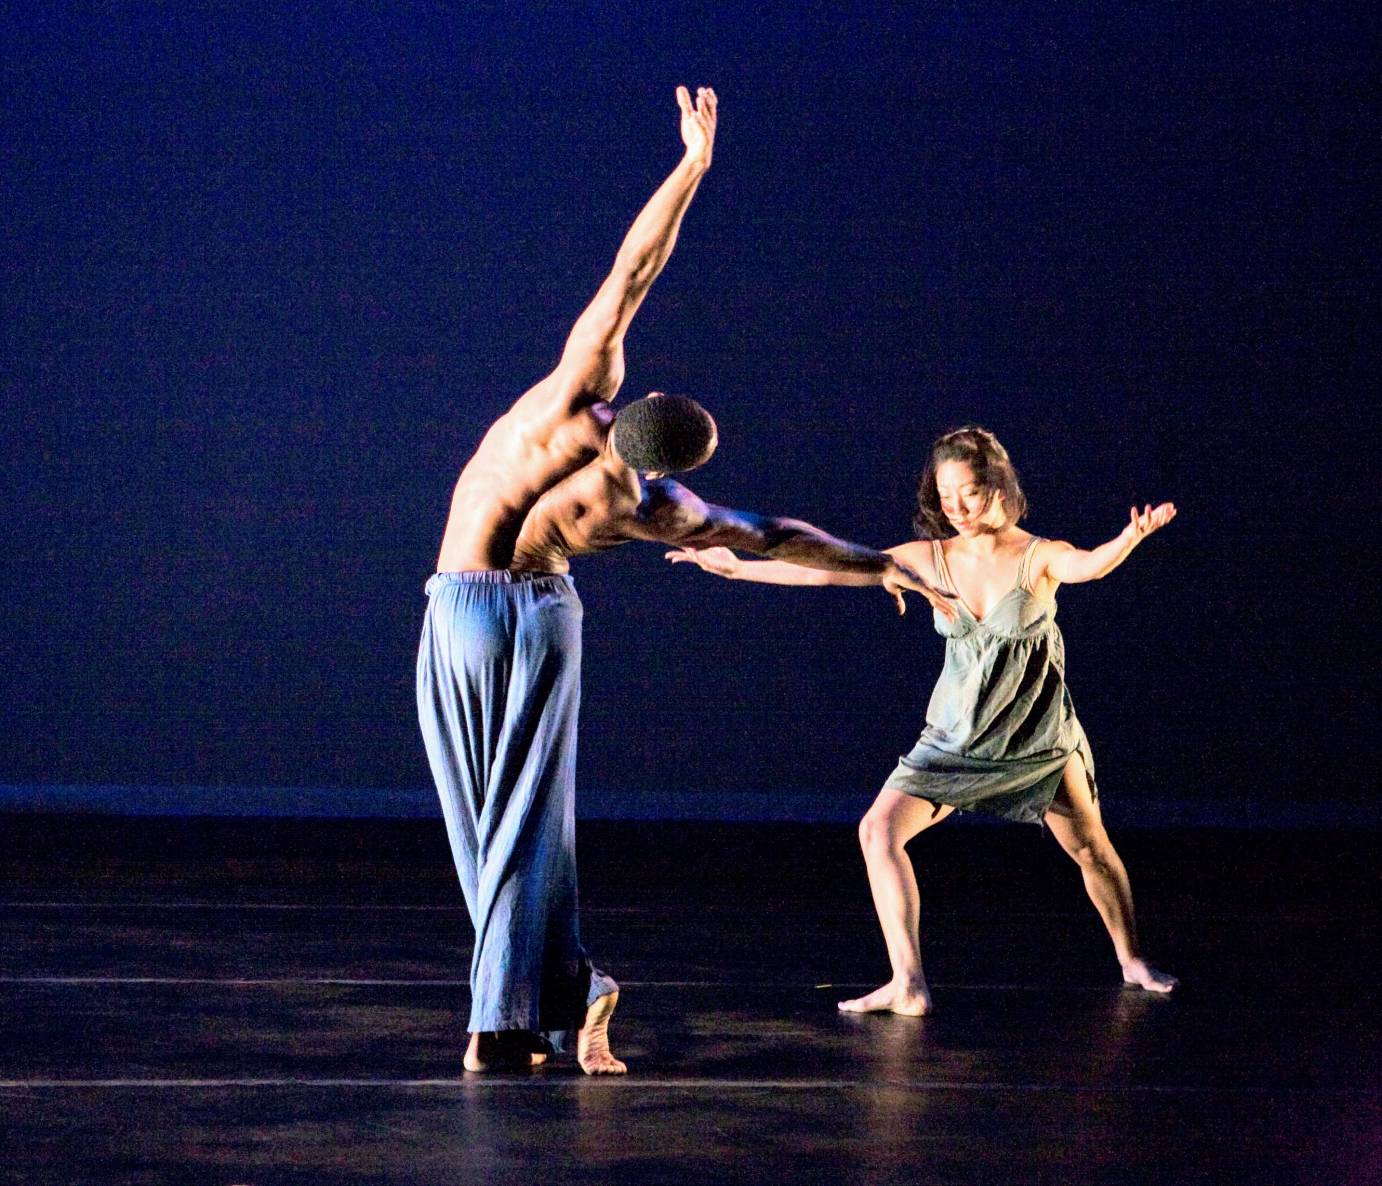 a Black man shirtless in loose light blue pants has his back to us as he bends towards his female partner, an Asian woman in a greenish wrinkled short tunic, she lunges toward him arms out to him, but looks at the floor 